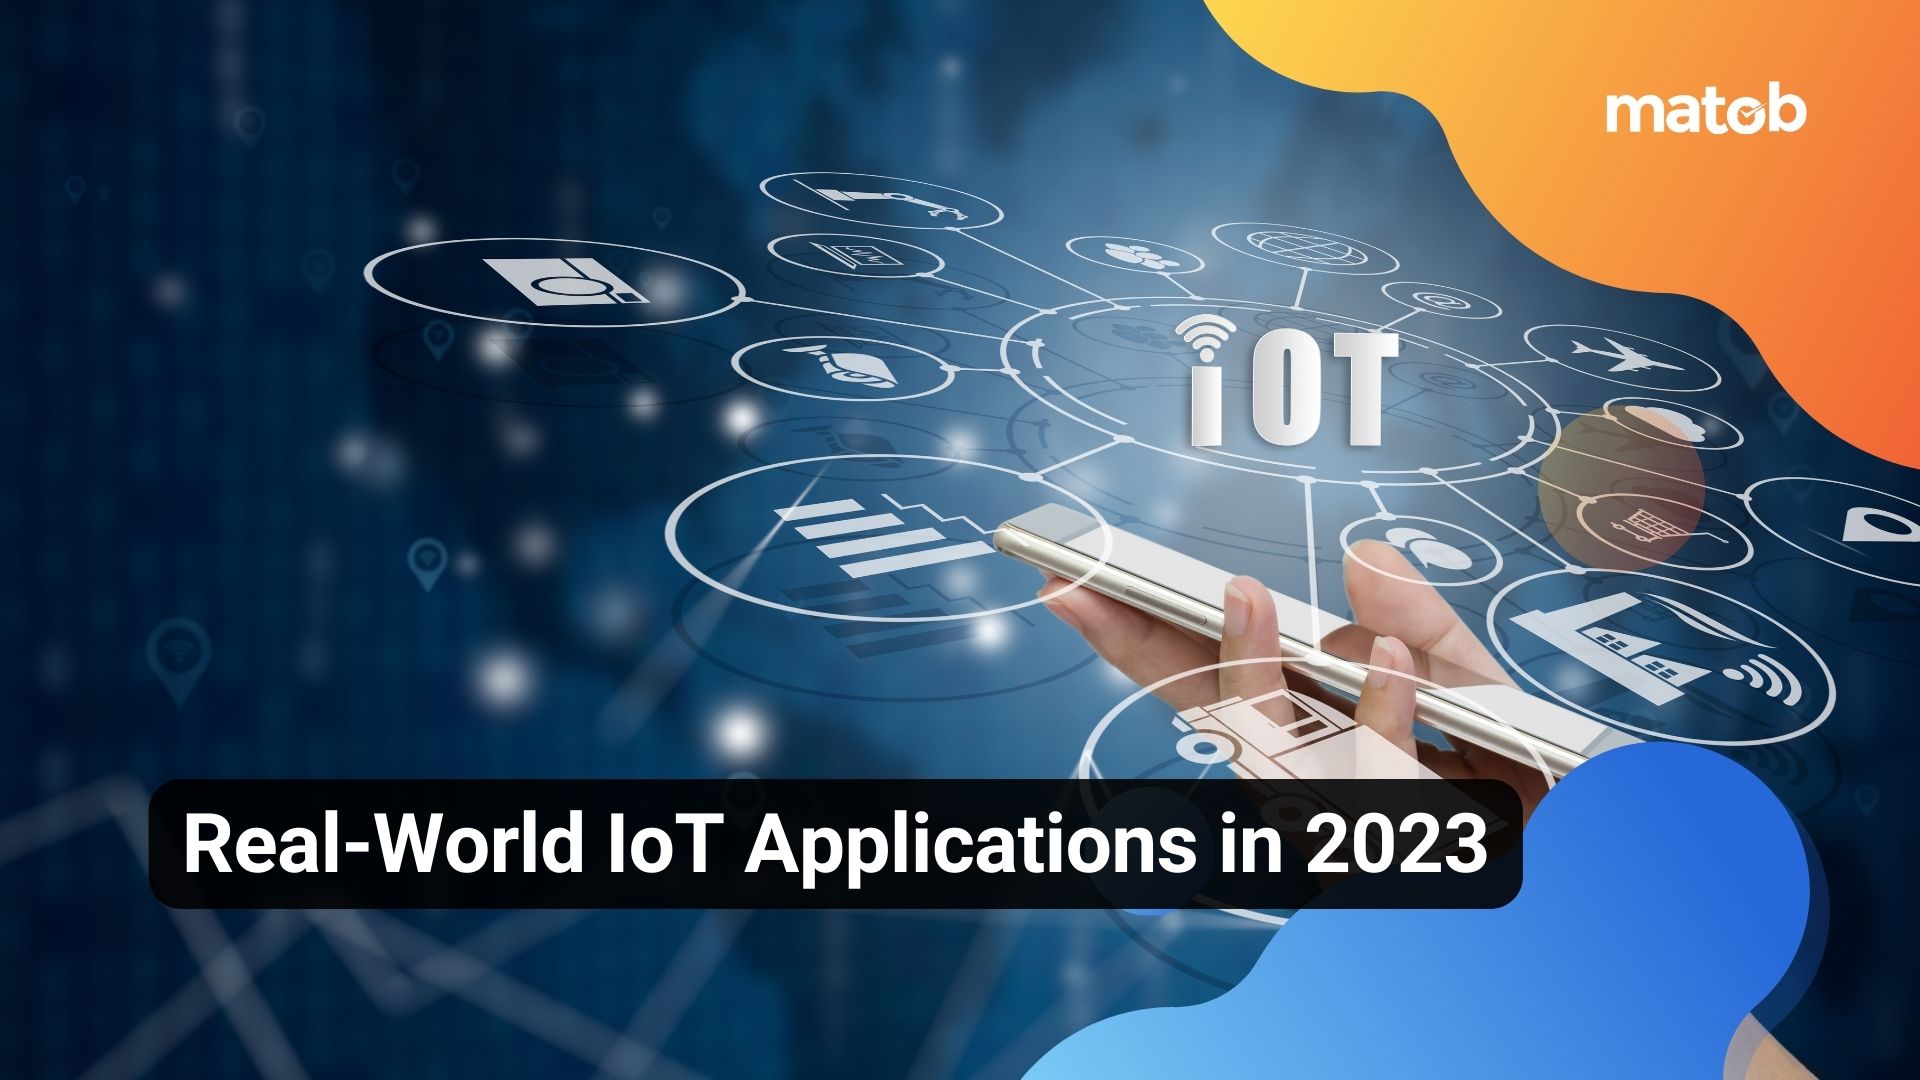 Real-World IoT Applications in 2023